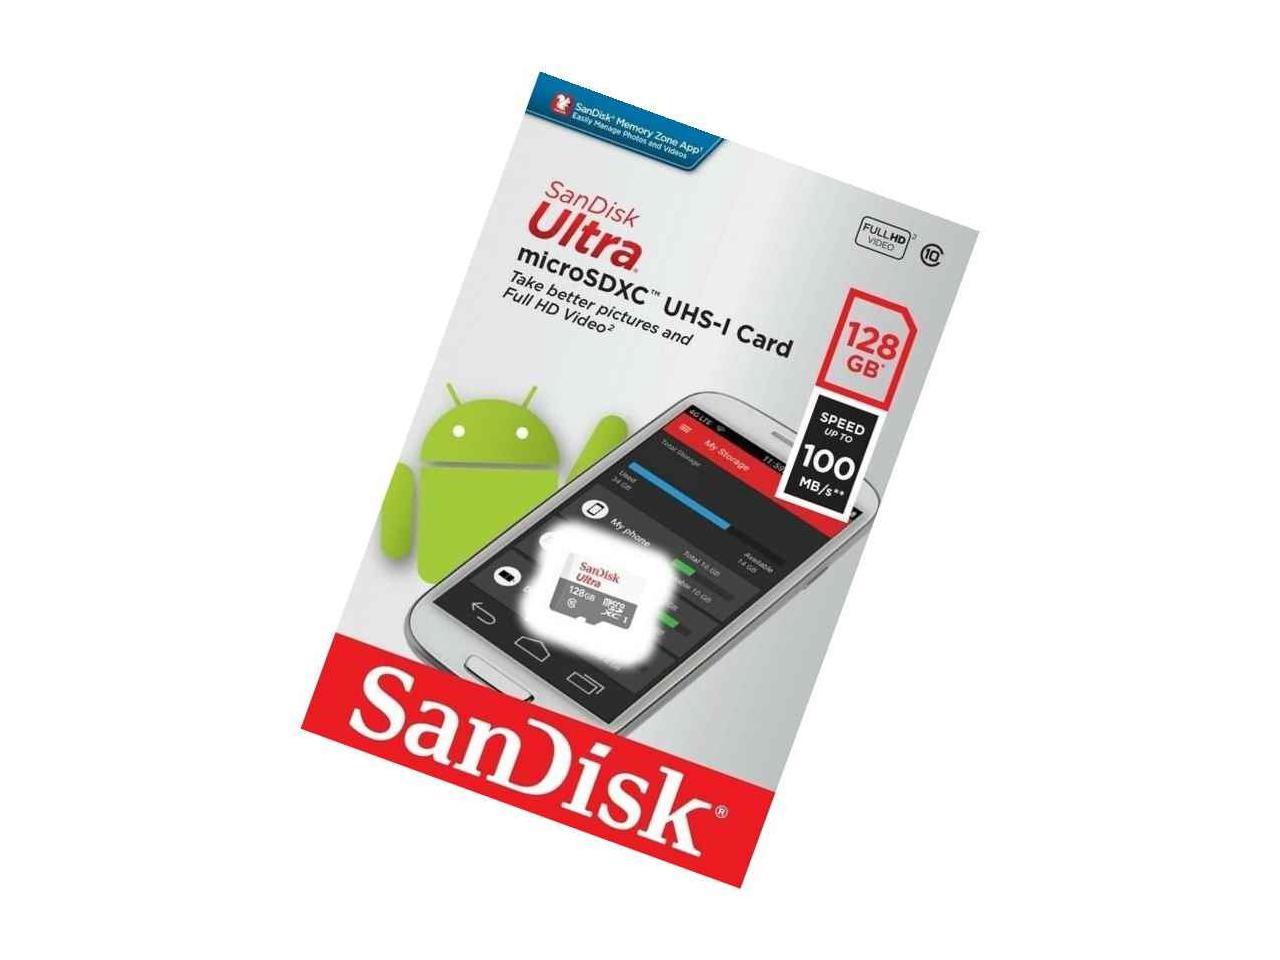 SanDisk Ultra 128GB MicroSDXC Verified for ZTE Grand X Quad by SanFlash 100MBs A1 U1 C10 Works with SanDisk